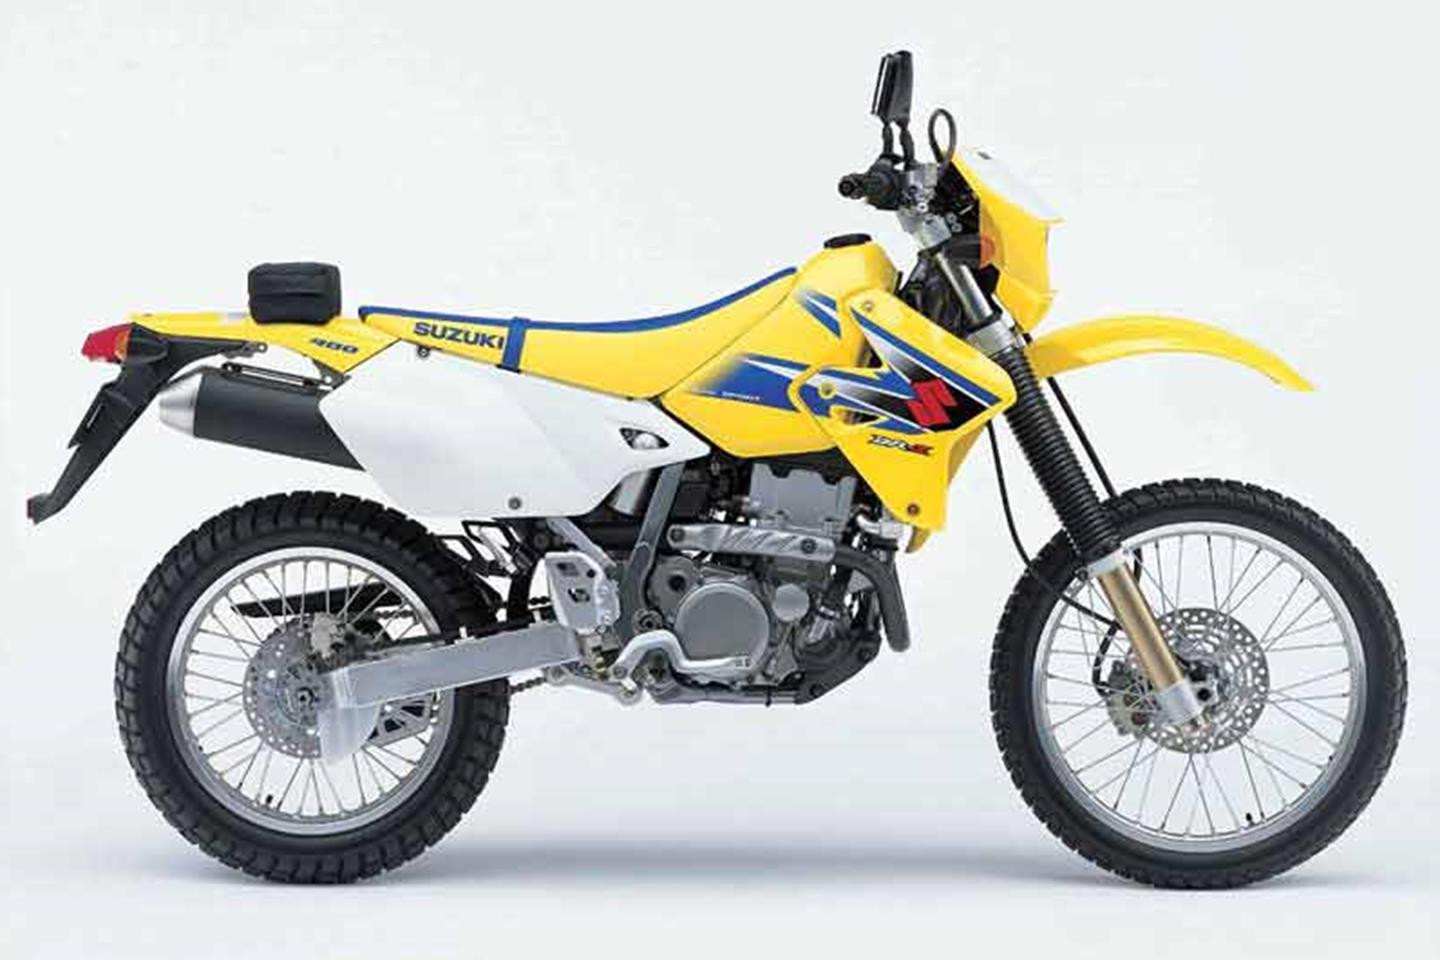 Suzuki DRZ400 S (2001-2009) review & used buying guide | MCN